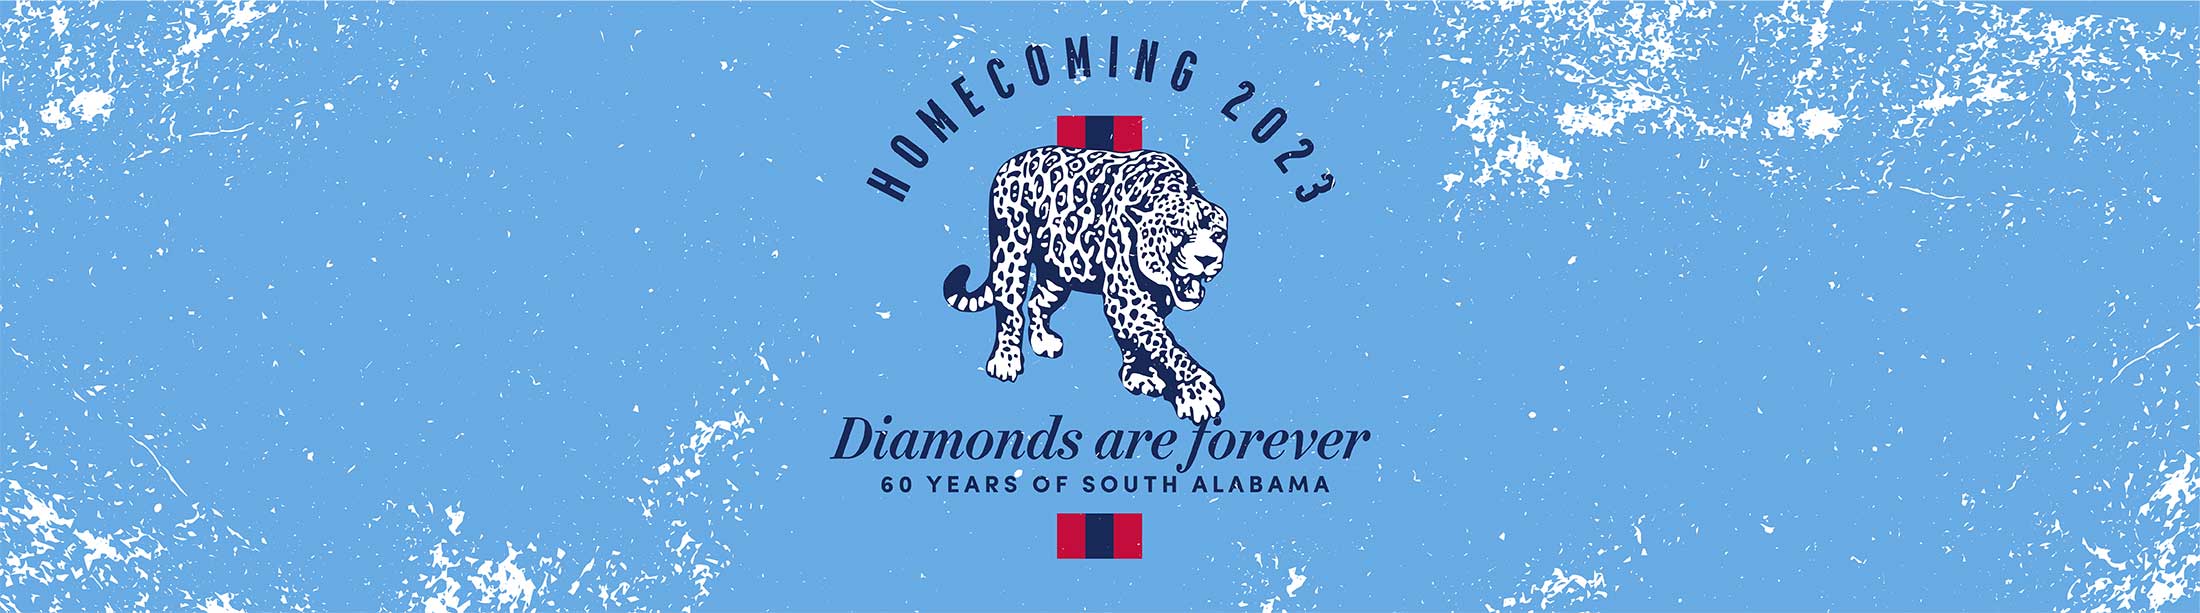 Homecoming 2023 Diamonds are forever 60 years of South Alabama